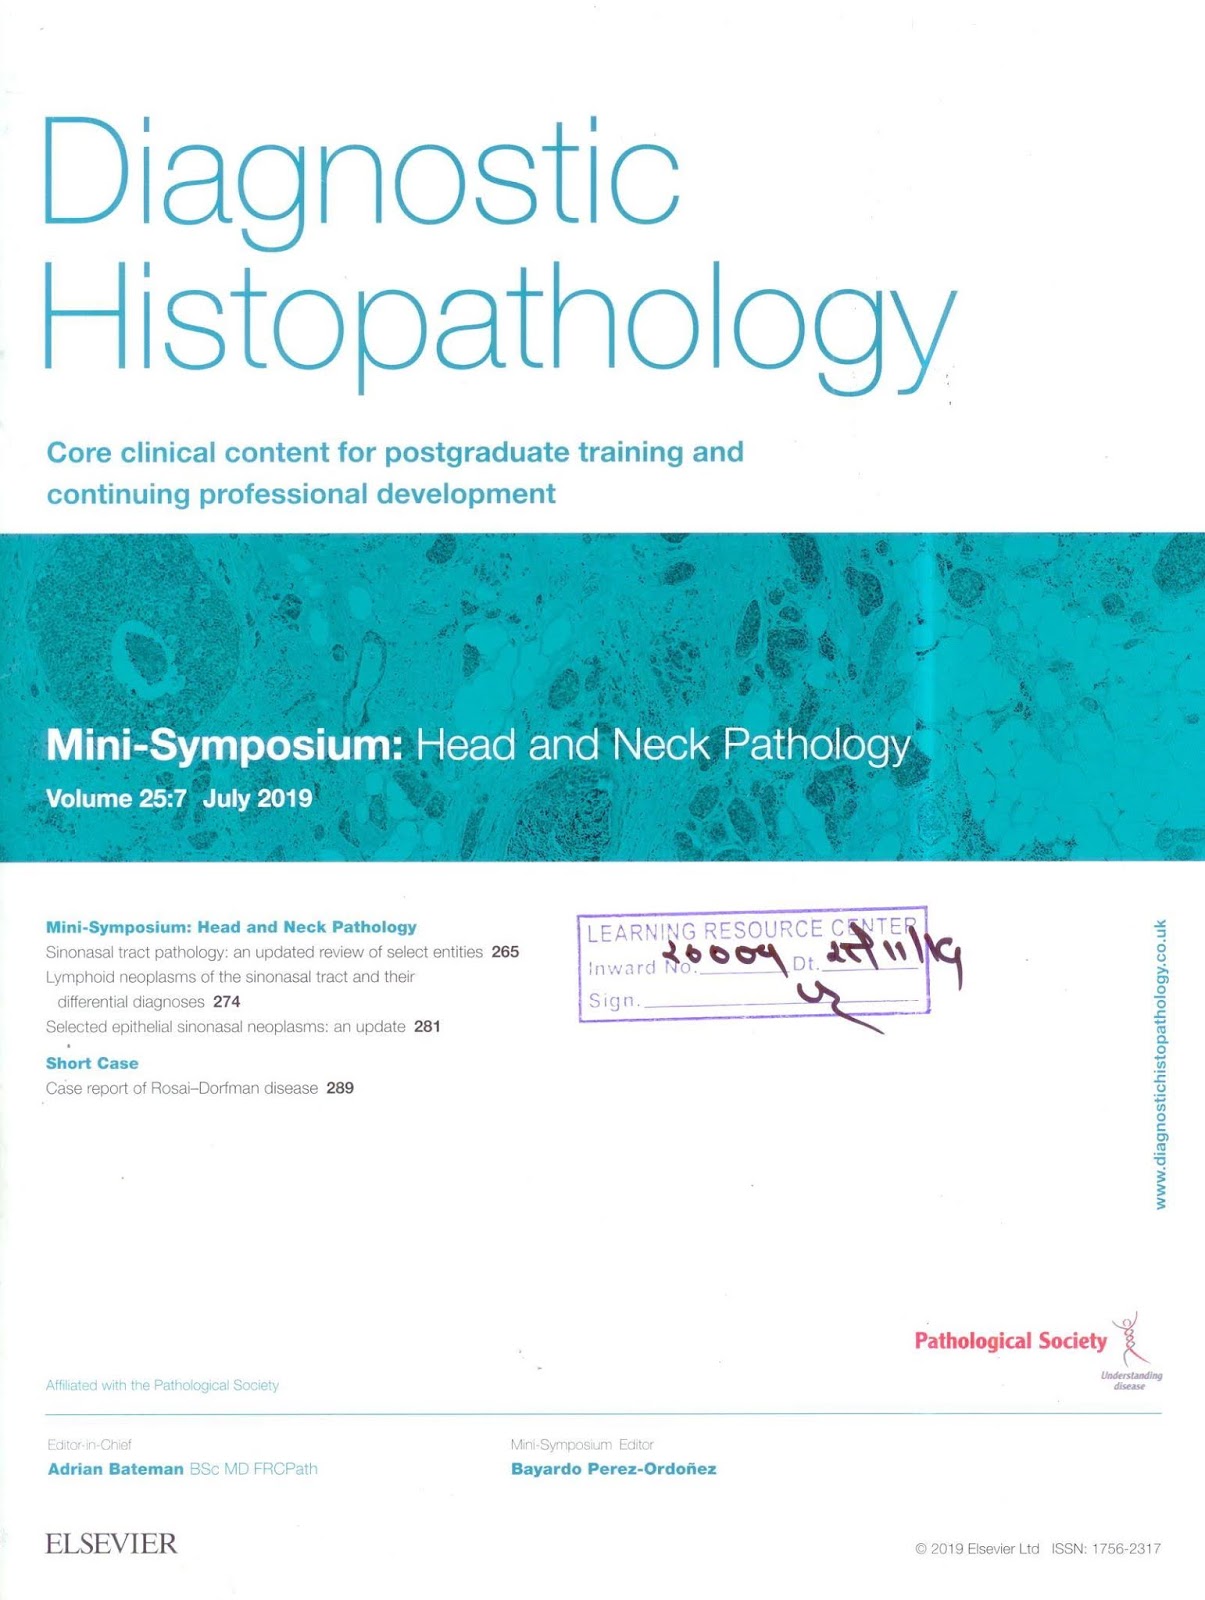 https://www.sciencedirect.com/journal/diagnostic-histopathology/vol/25/issue/7